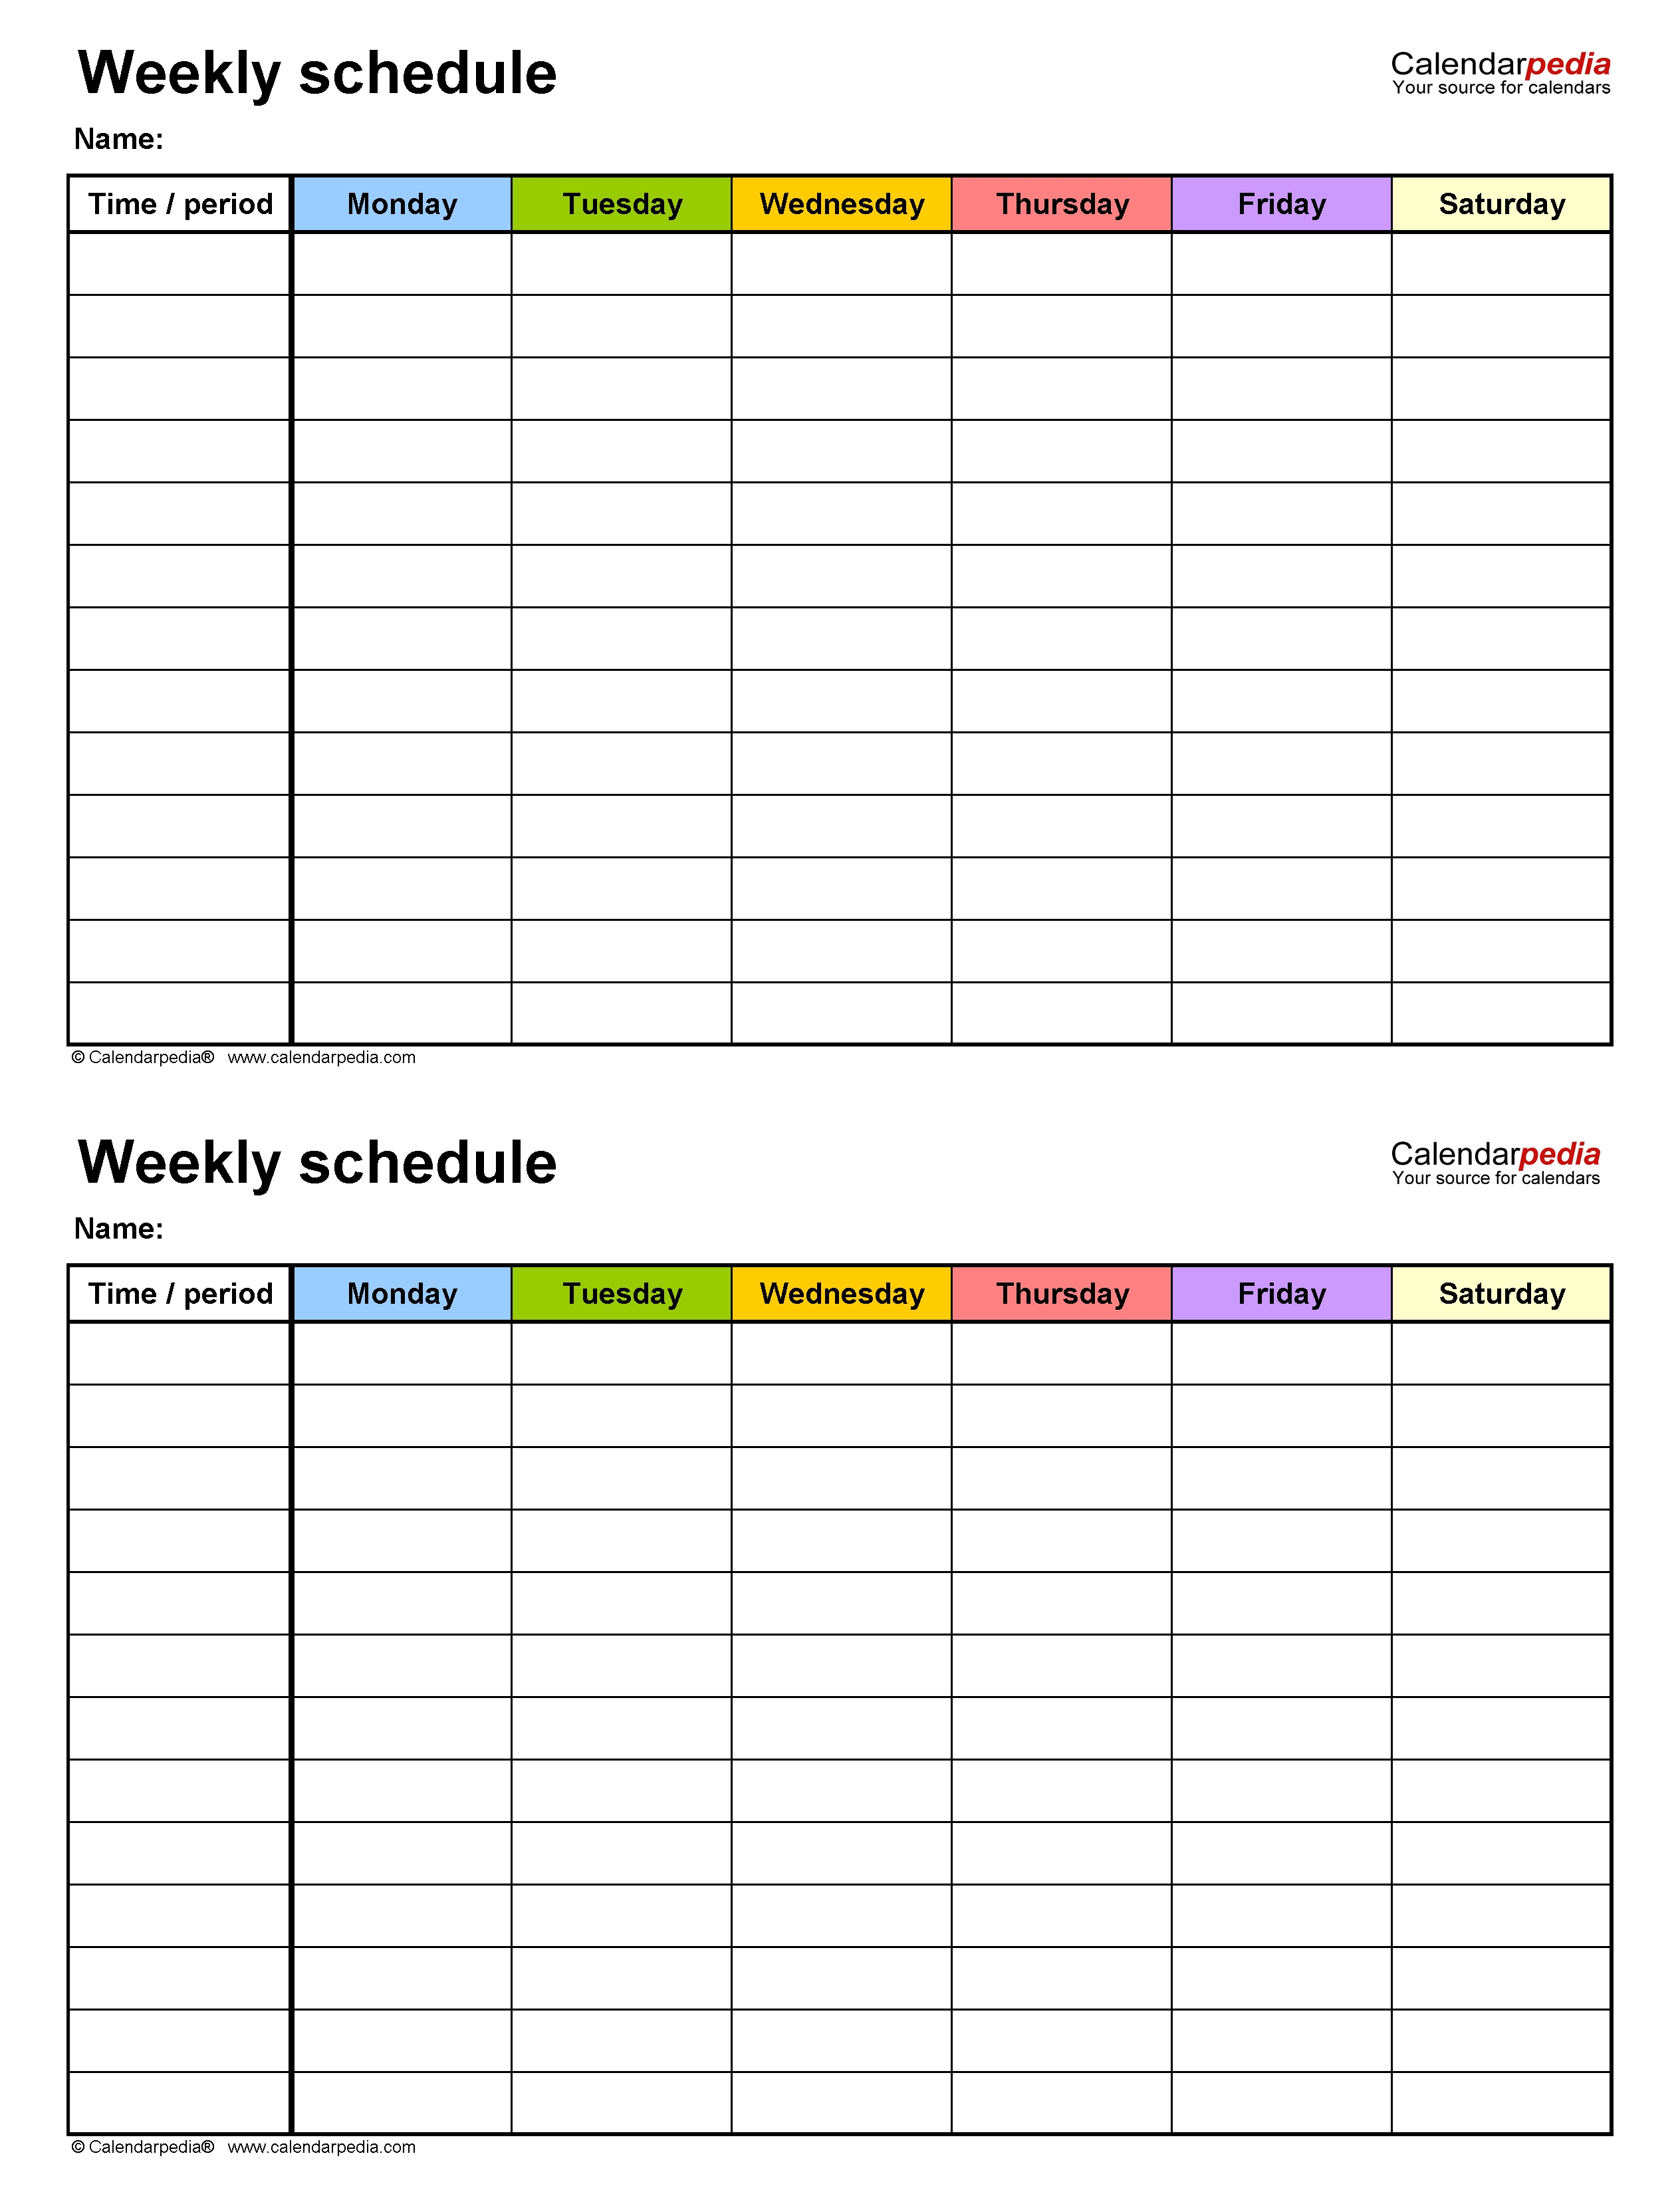 Free Weekly Schedules For Pdf - 18 Templates 2 Week Calendar Template Pdf